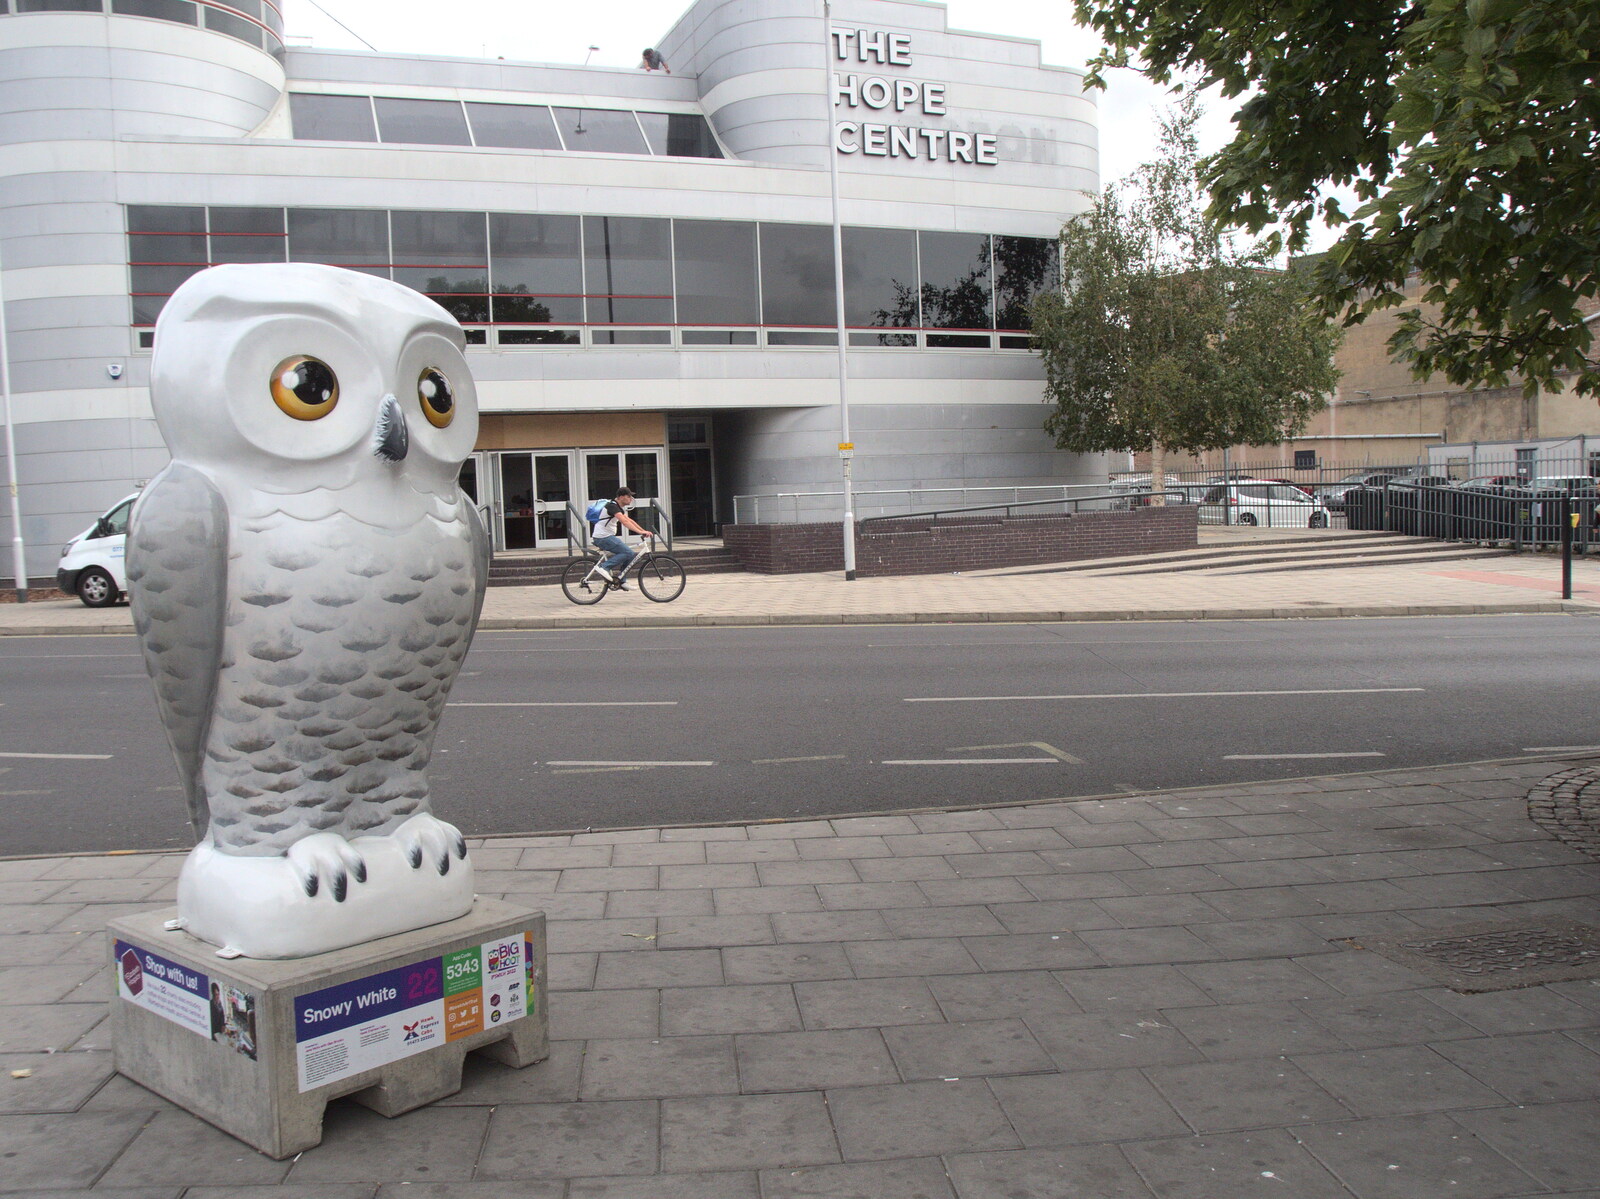 The Eye Piggy Tail Trail and Ipswich Dereliction, Suffolk - 29th July 2022: A grey owl outside the former Odeon Cinema